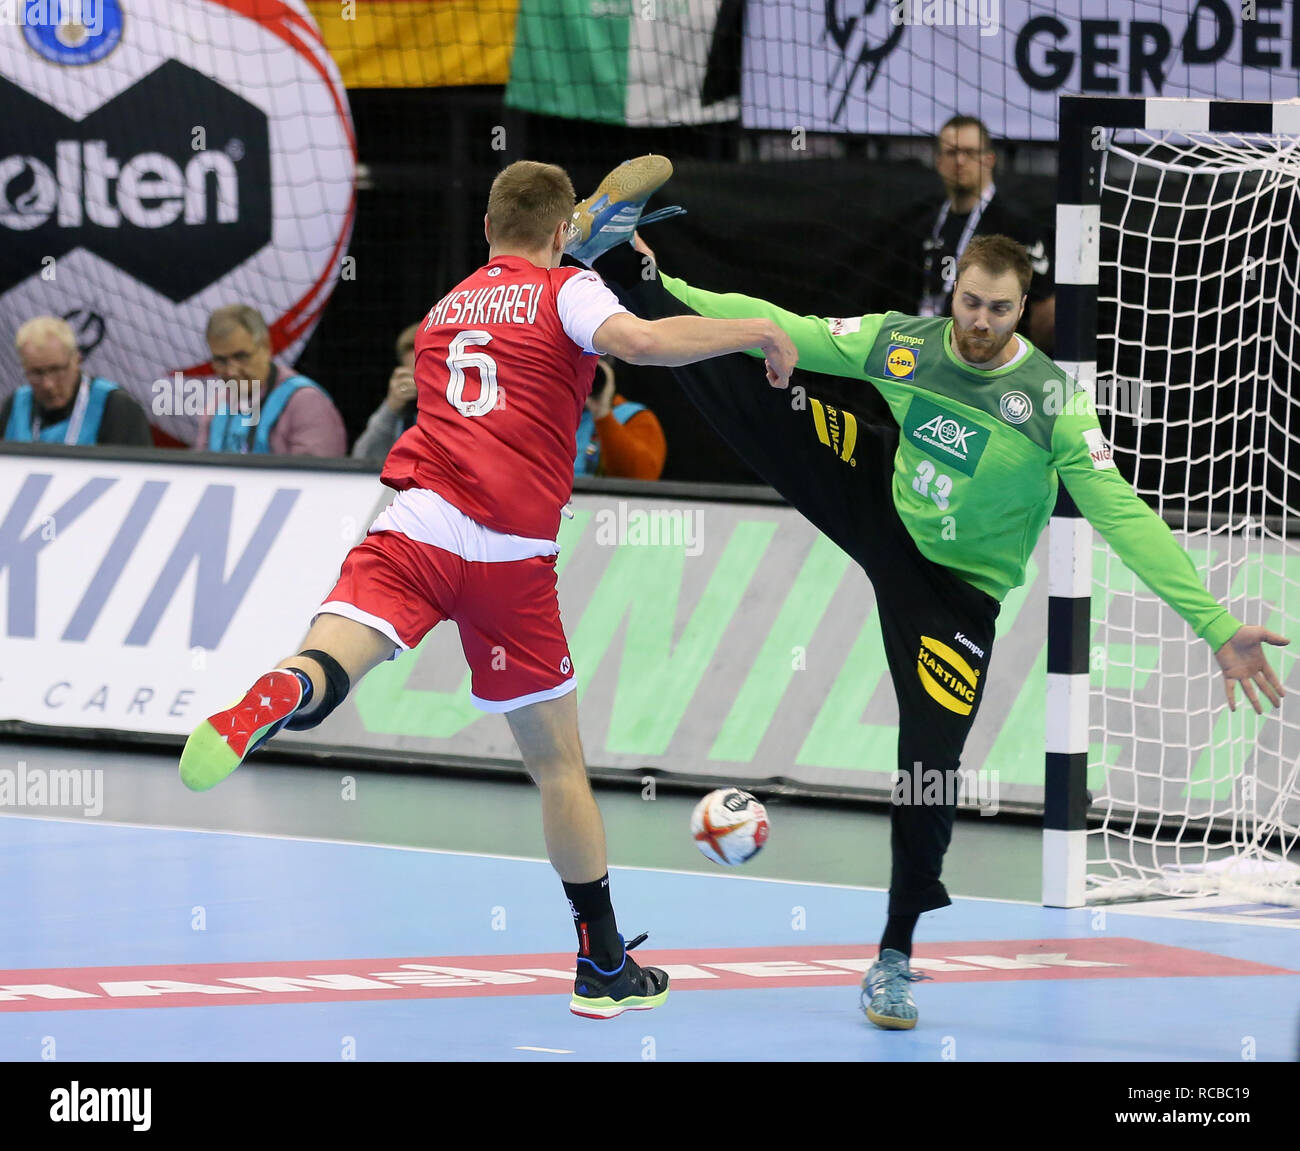 Berlin, Germany. 14th Jan, 2019. Handball IHF Men's World Championship: Russia v Germany. Russia's right wing Daniil Shishkarev scores a goal against Germany's goalkeeper Andreas Wolff Credit: Mickael Chavet/Alamy Live News Stock Photo